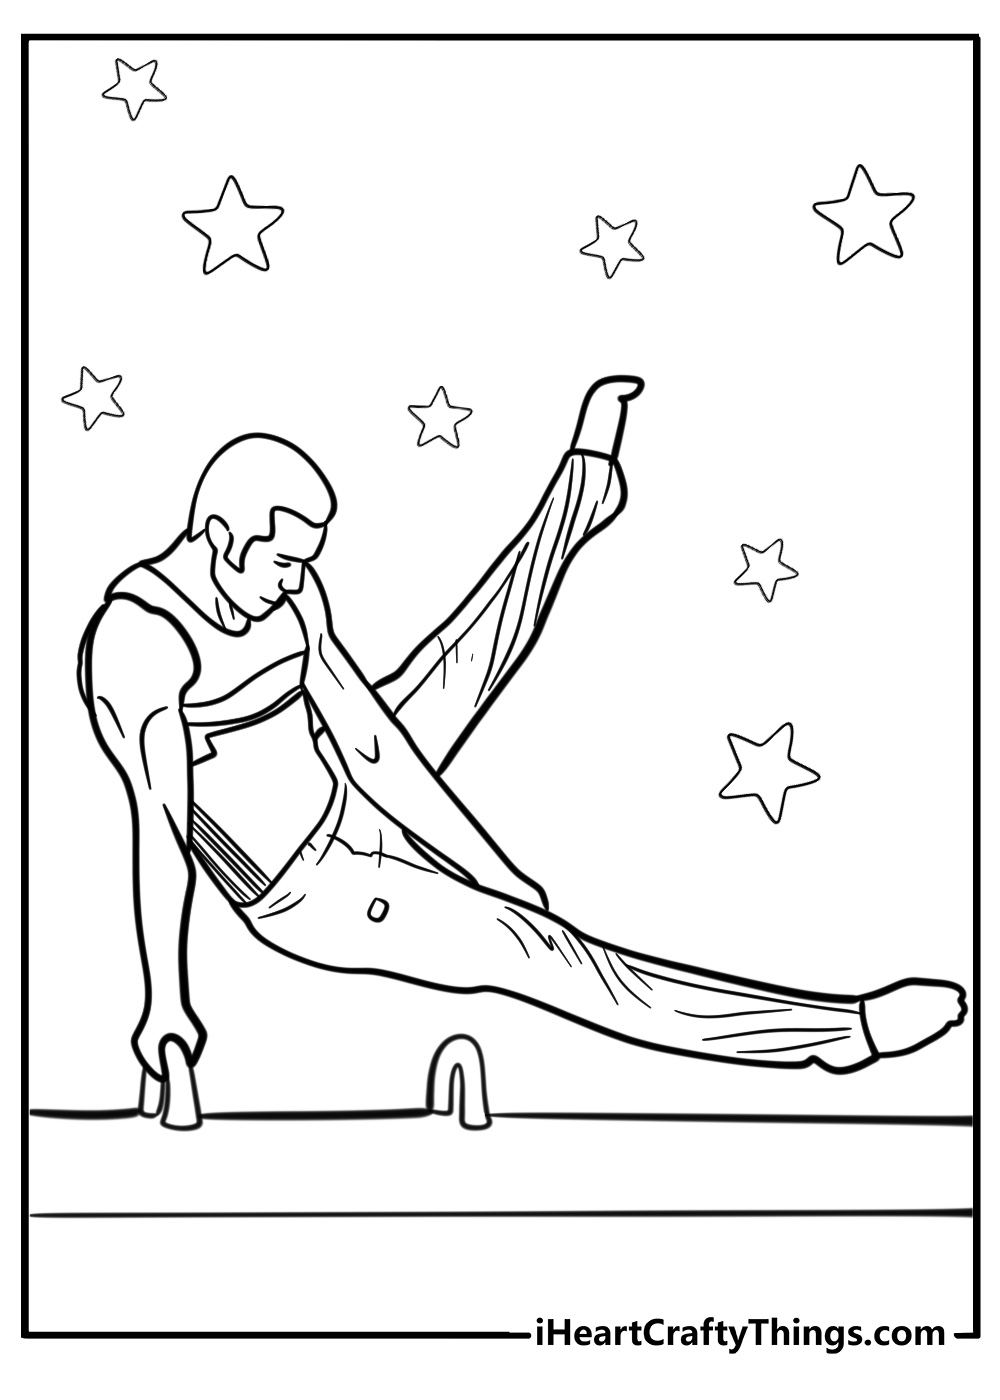 Gymnastics coloring page of realistic male gymnast on pommel horse